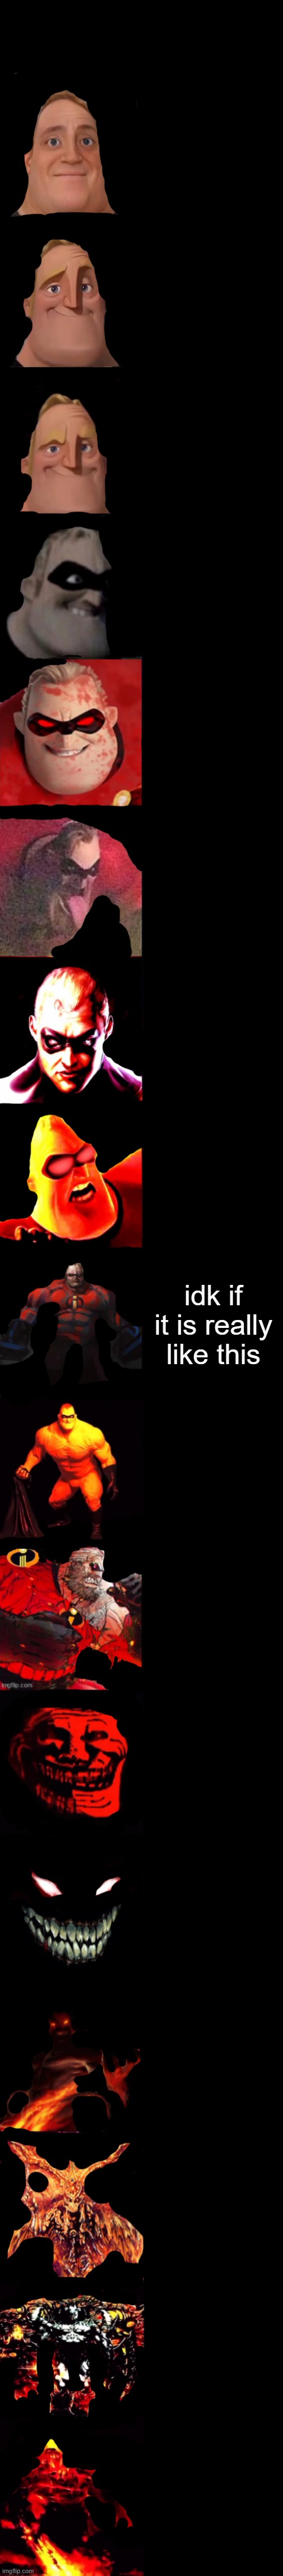 the last ones looks very bad | idk if it is really like this | image tagged in mr incredible becoming evil very extended | made w/ Imgflip meme maker